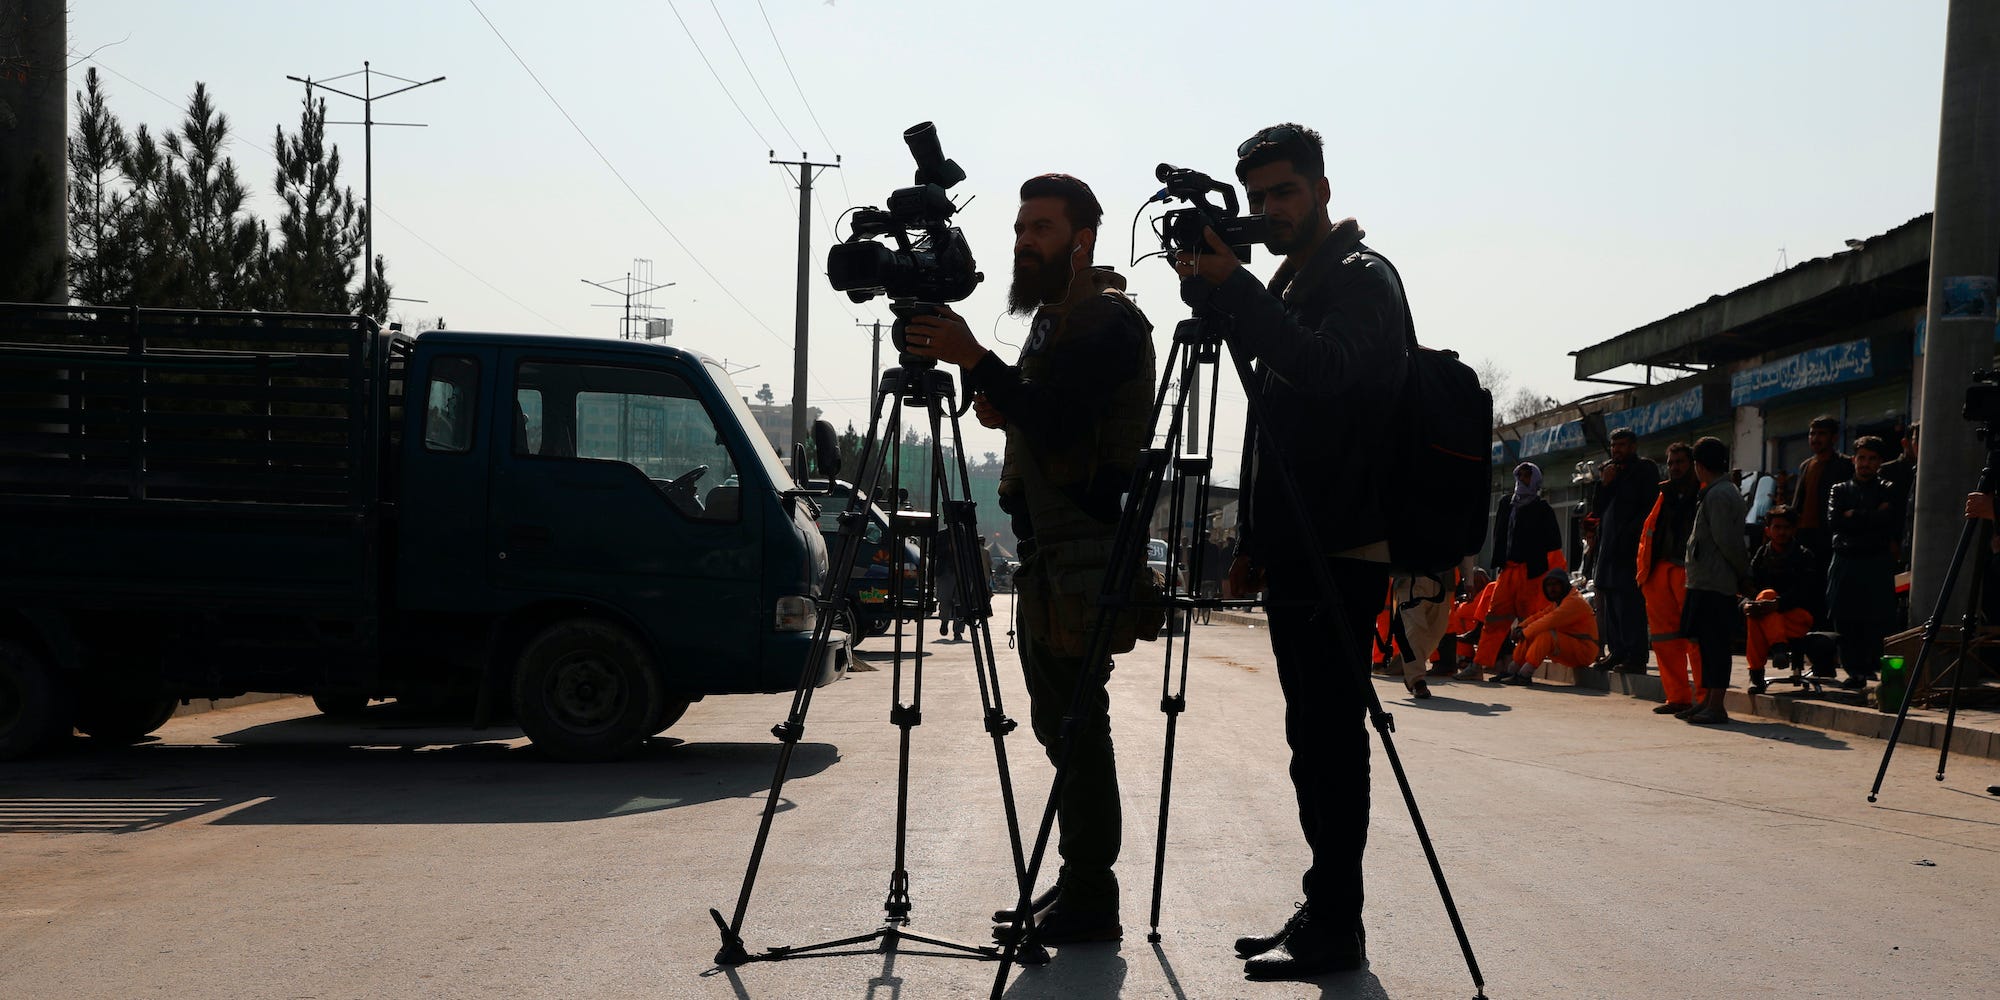 Afghan journalists film at the site of a bombing attack in Kabul, Afghanistan